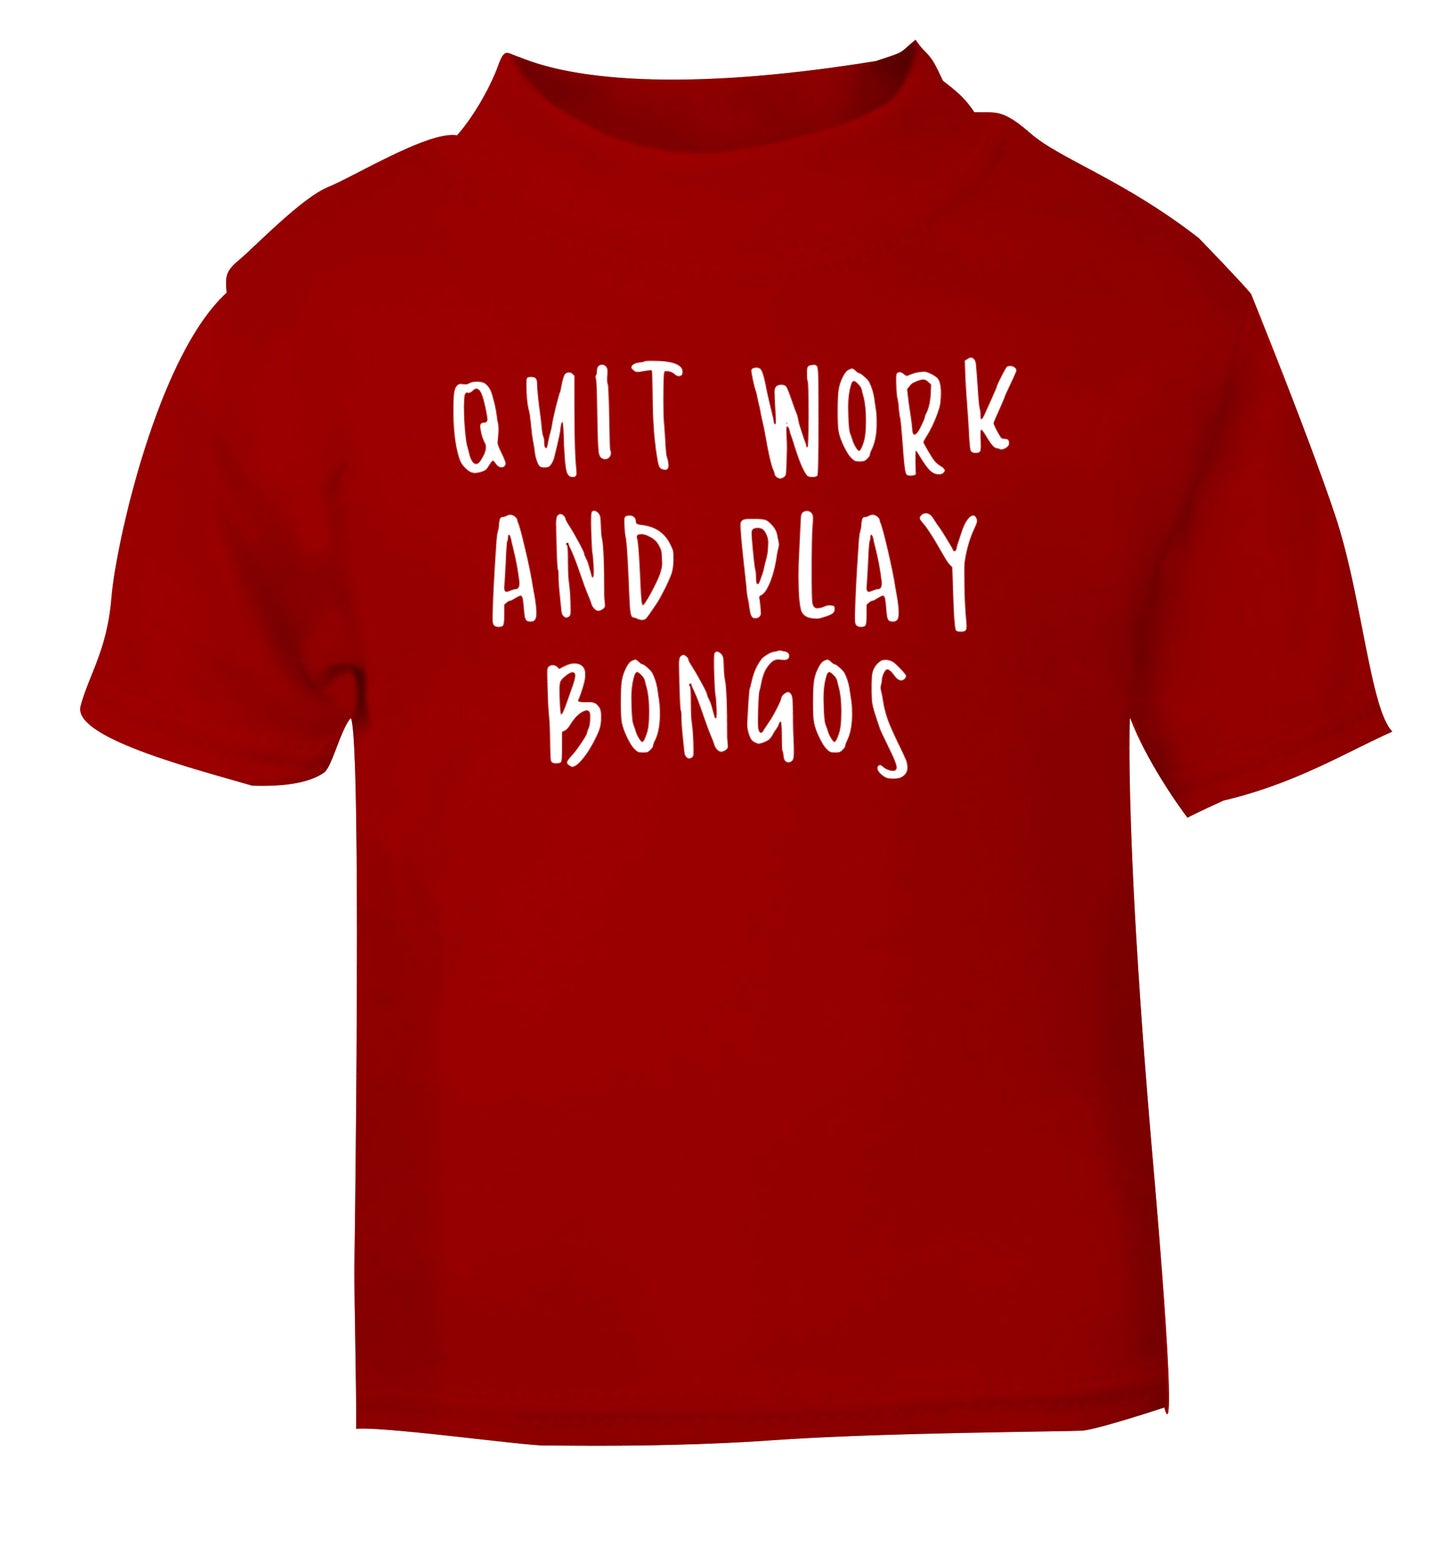 Quit work and play bongos red Baby Toddler Tshirt 2 Years